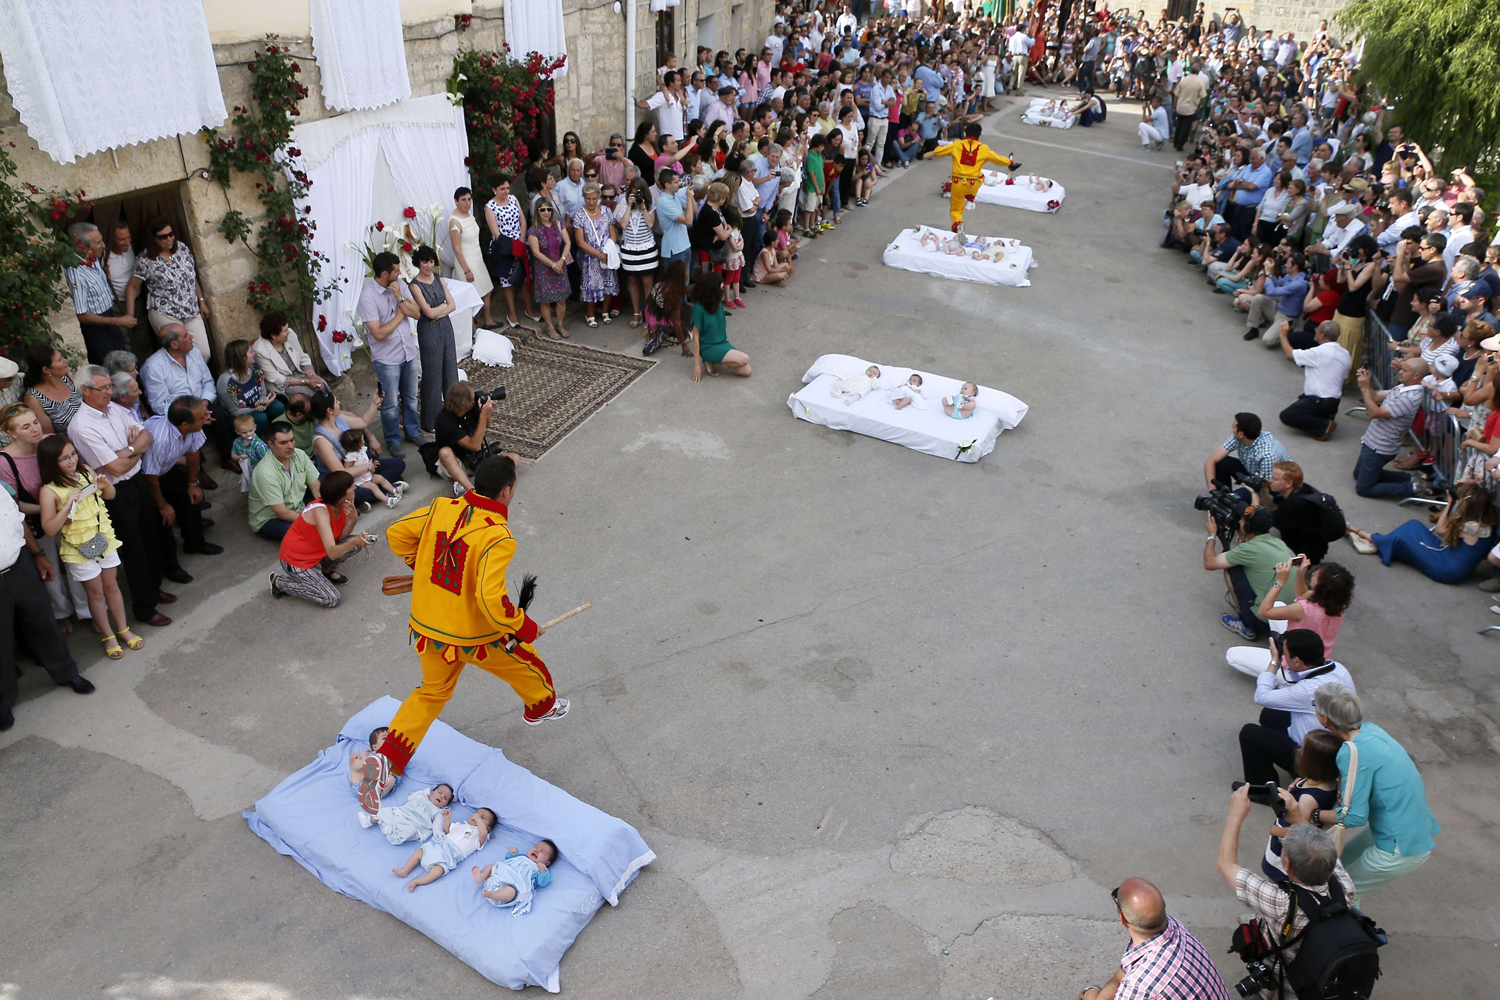 A man dressed up as the devil jumps over babies lying on a mattress in the street during 'El Colacho', the 'baby jumping festival' on June 22, 2014 in the village of Castrillo de Murcia, near Burgos, Spain.